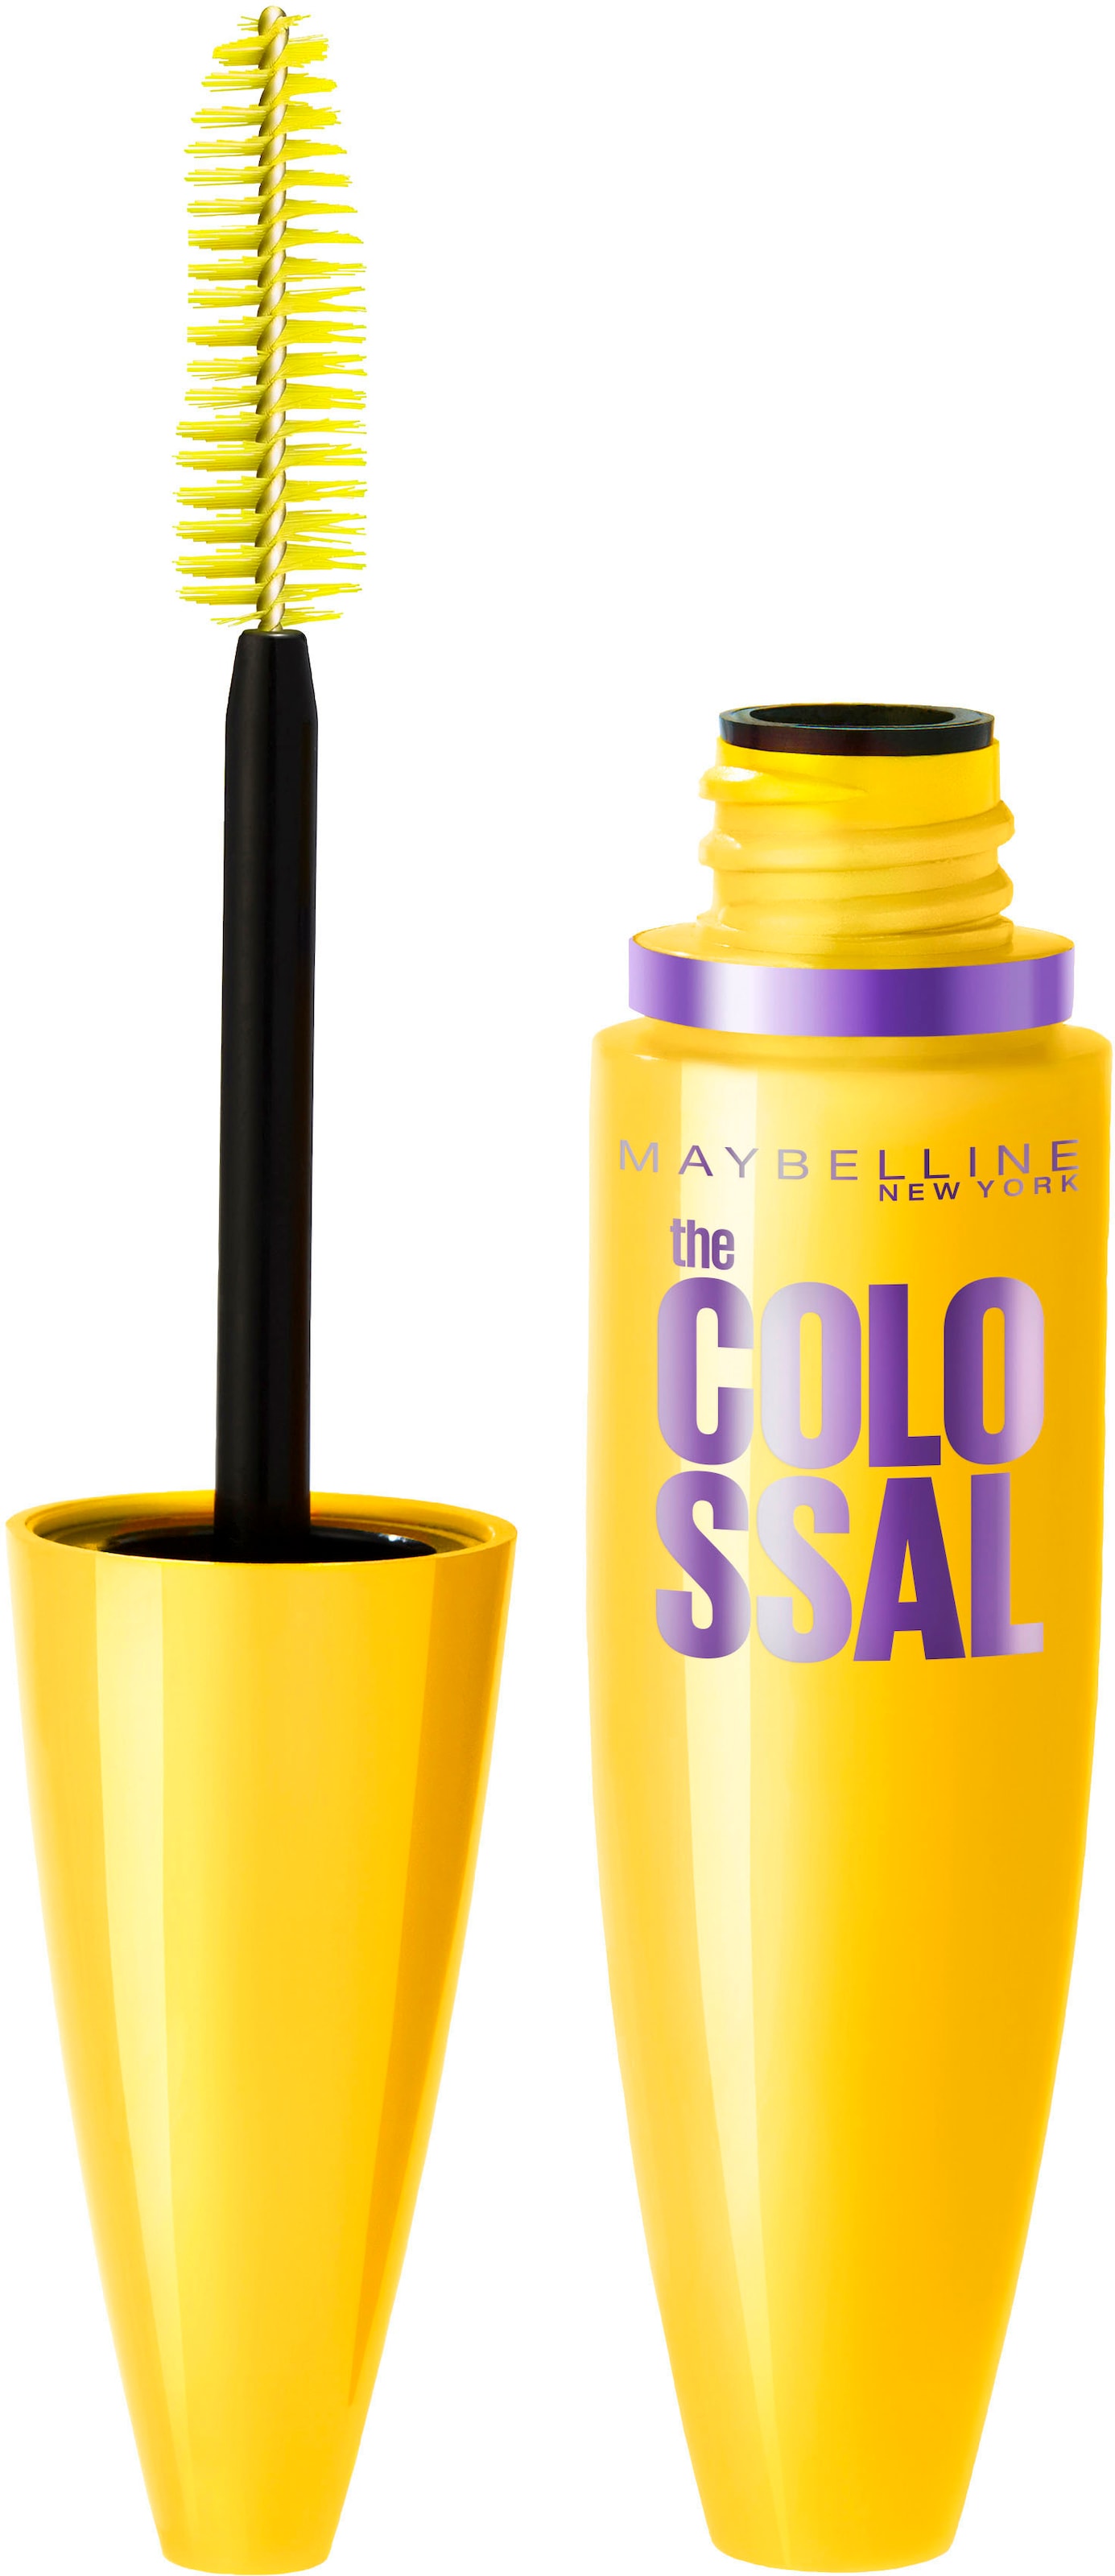 MAYBELLINE NEW YORK Mascara The Express ♕ »Volum\' bei Colossal«